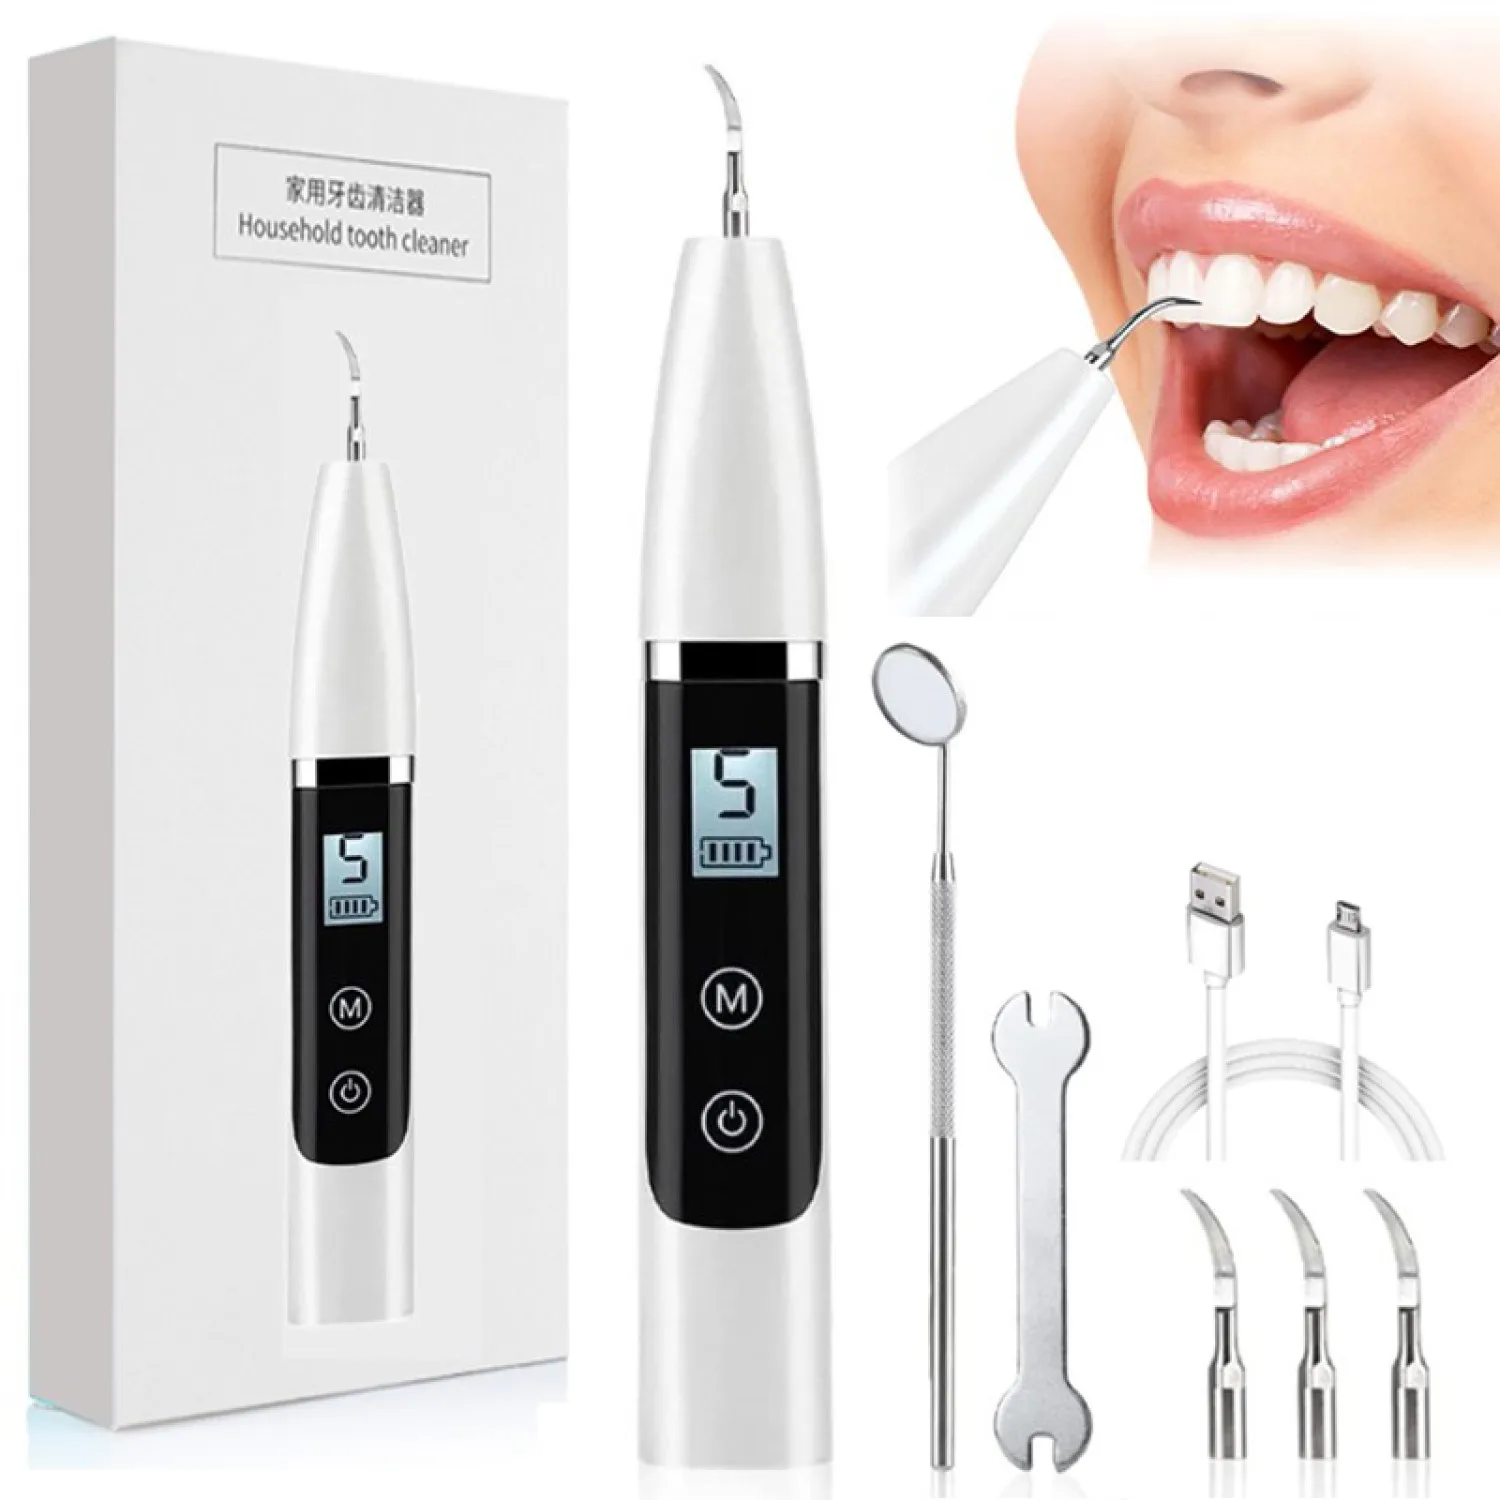 

Ultrasonic Calculus Remover Electric Portable Dental Scaler Ultrasonic Tooth Cleaner Teeth Whitening Treatment Scaling Tools